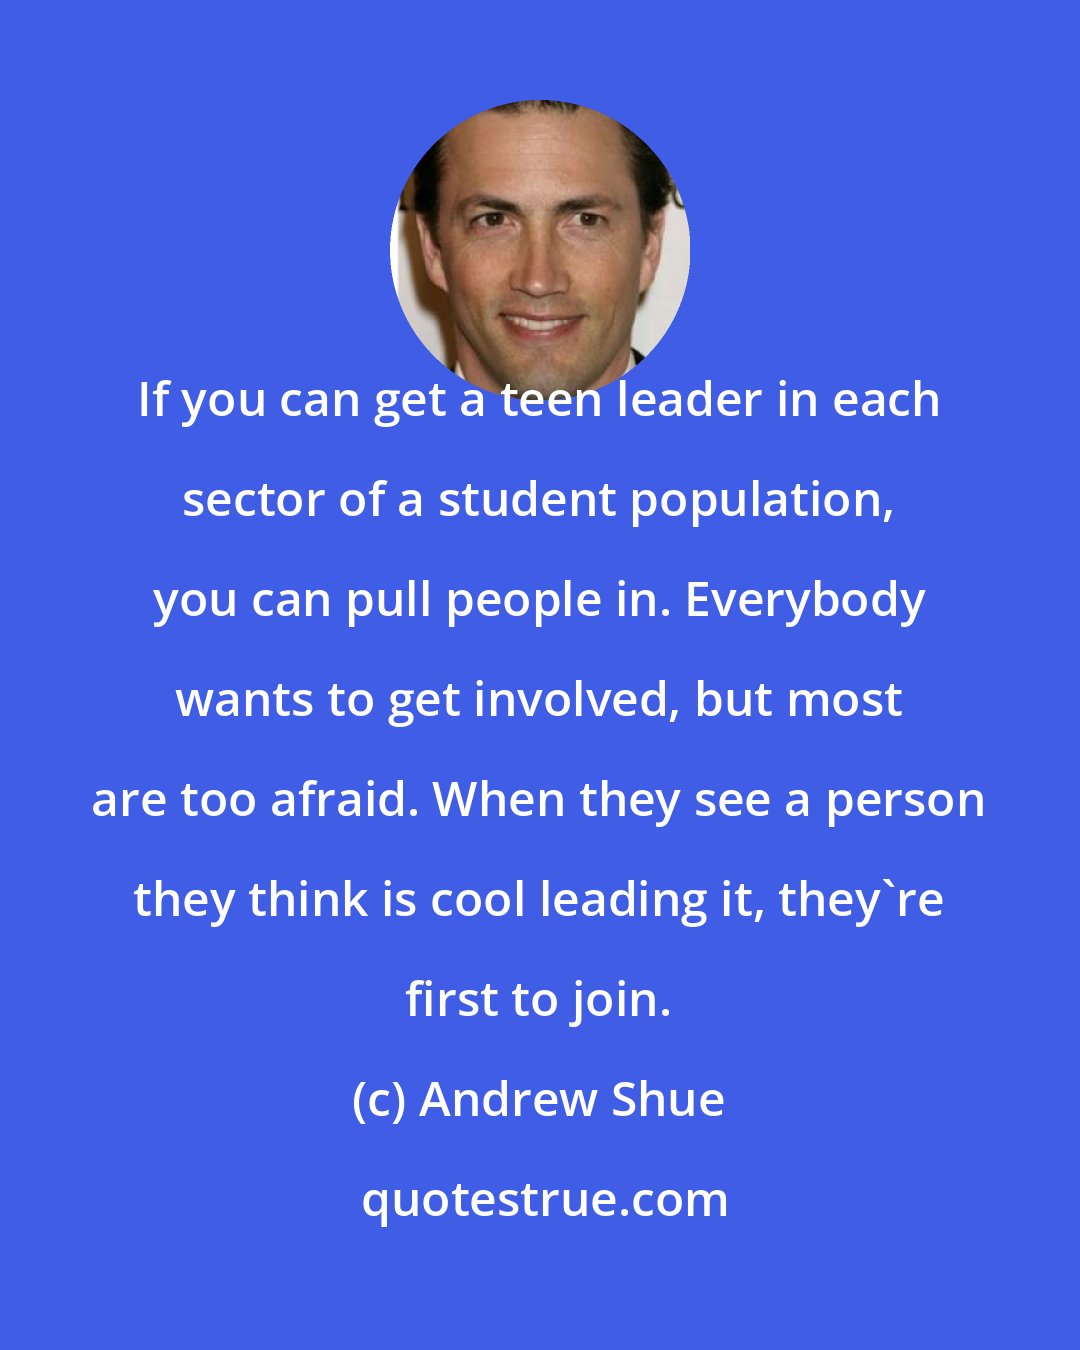 Andrew Shue: If you can get a teen leader in each sector of a student population, you can pull people in. Everybody wants to get involved, but most are too afraid. When they see a person they think is cool leading it, they're first to join.